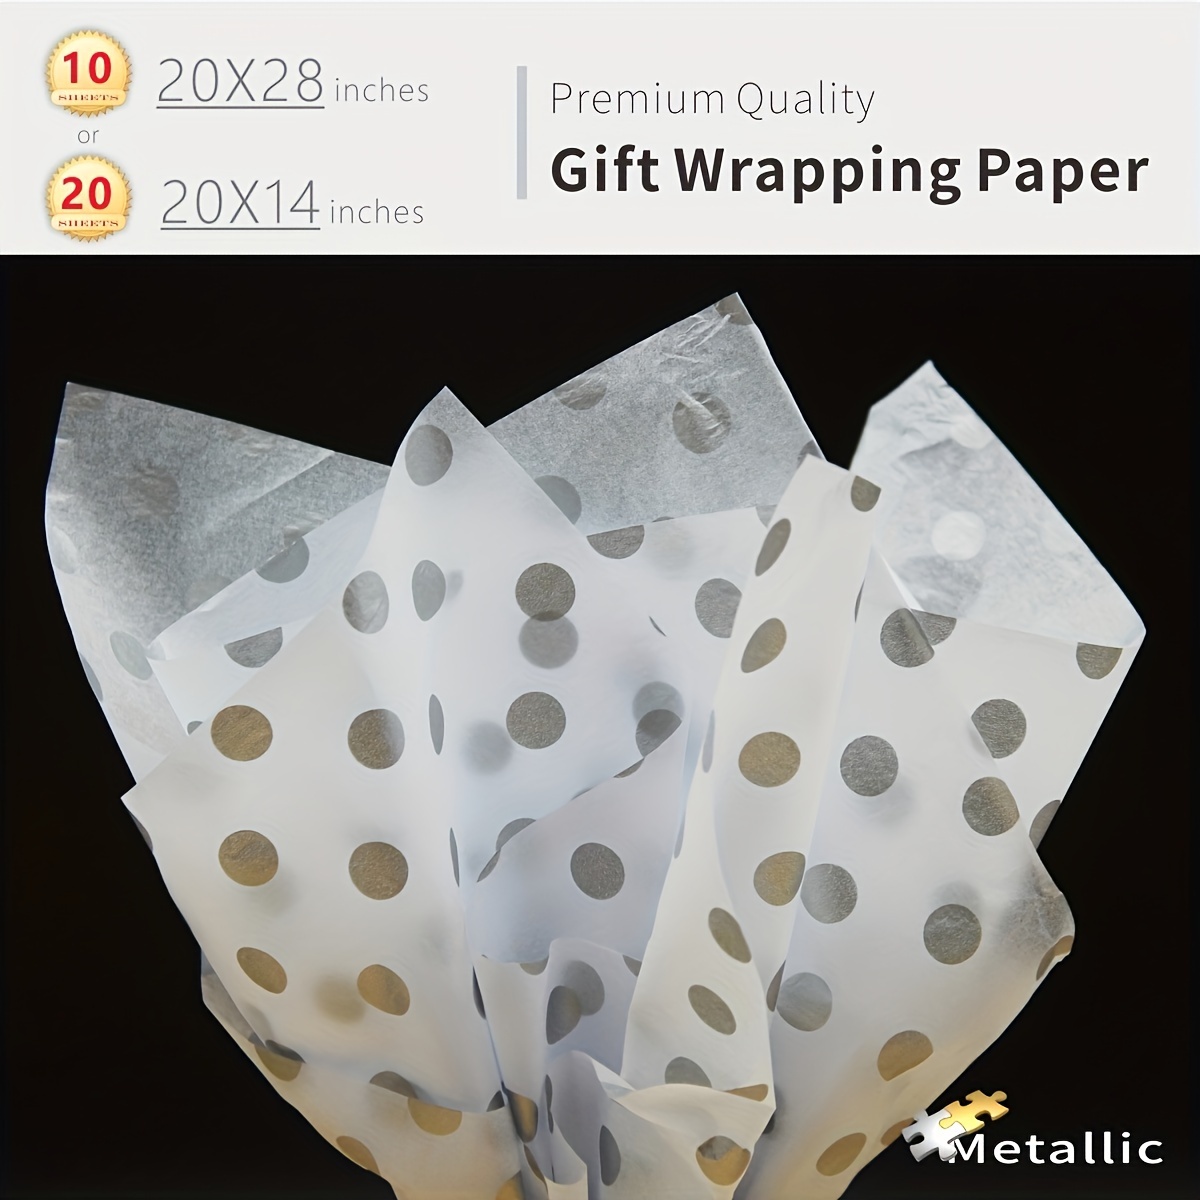 100 Sheets 20X14 Silver Gift Wrapping Tissue Paper Bulk Metallic Paper  for Gift Bags,Mother's Day Weddings Birthday Showers Arts Craft Party Favor